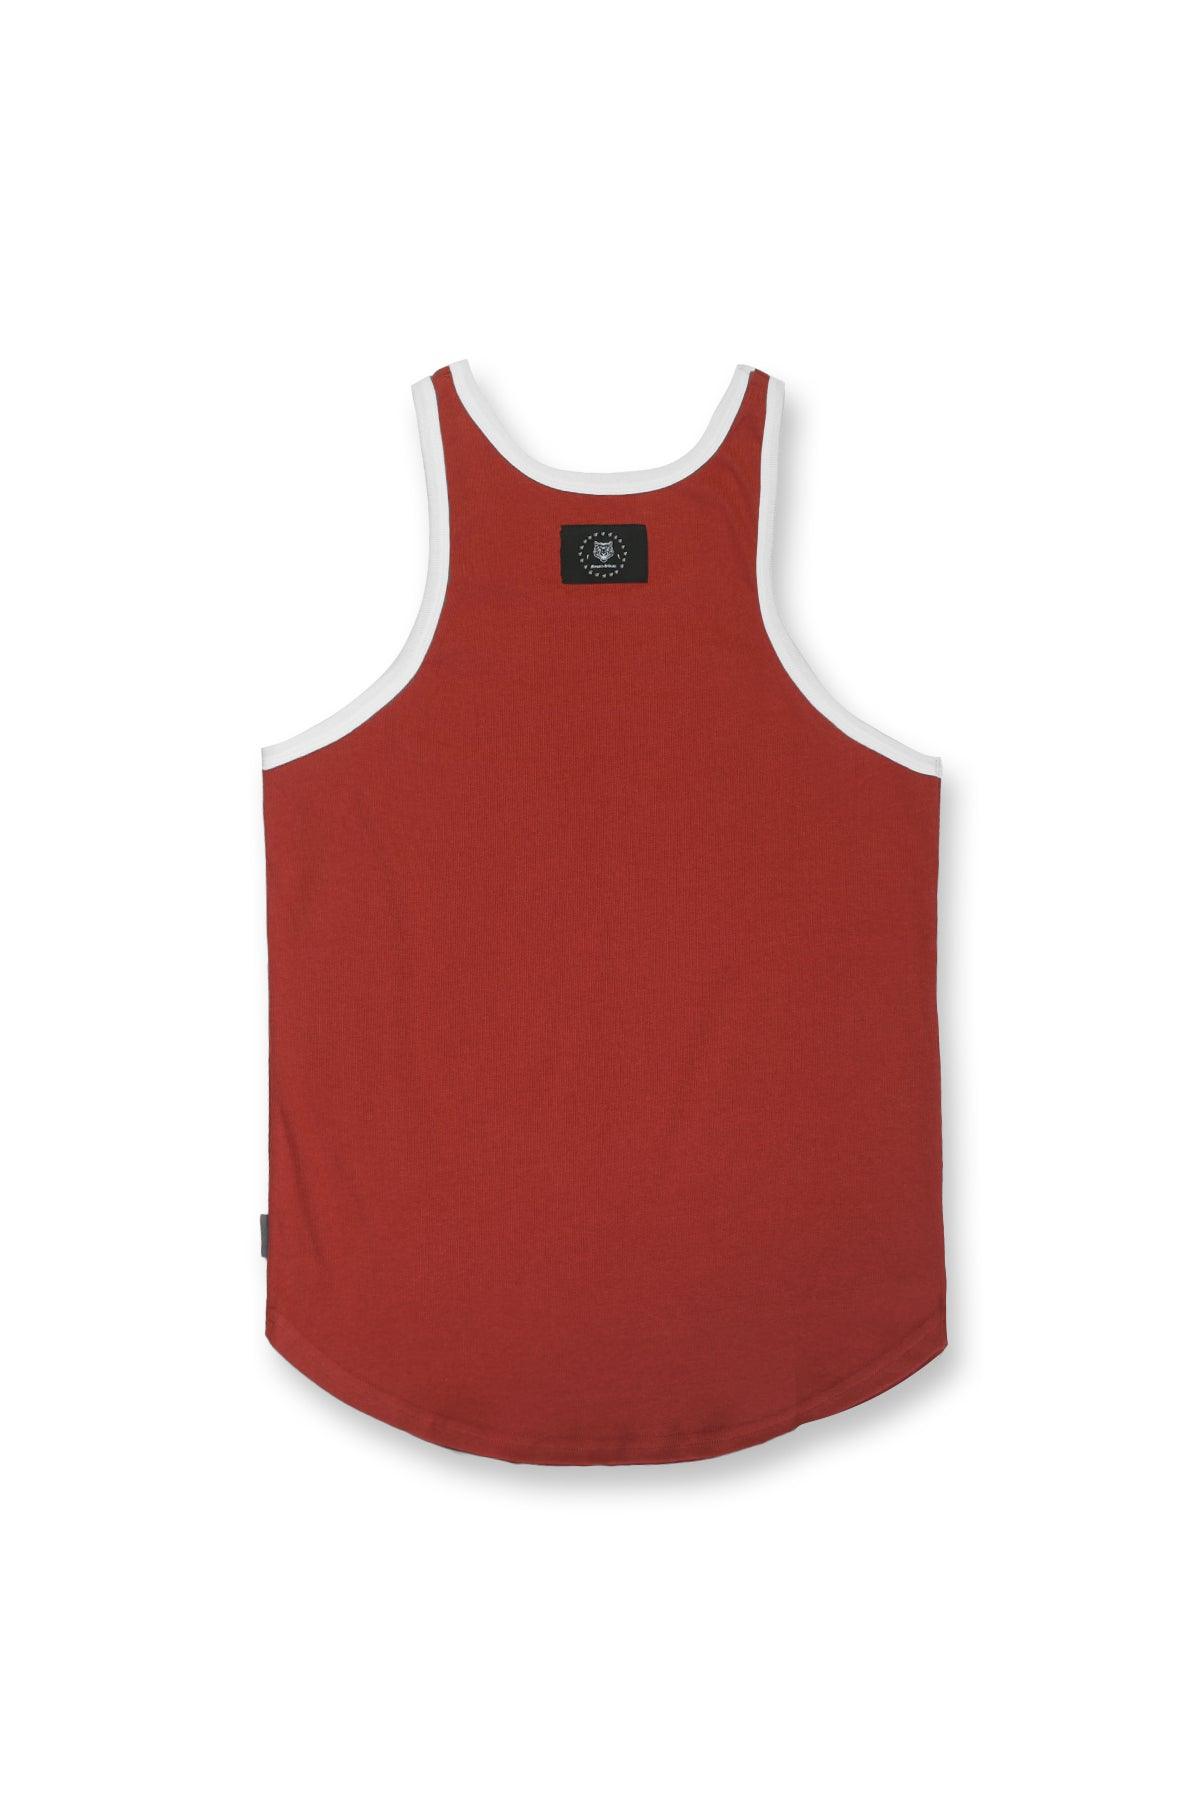 Athletic Ribbed Tank Top - Red & White - Jed North